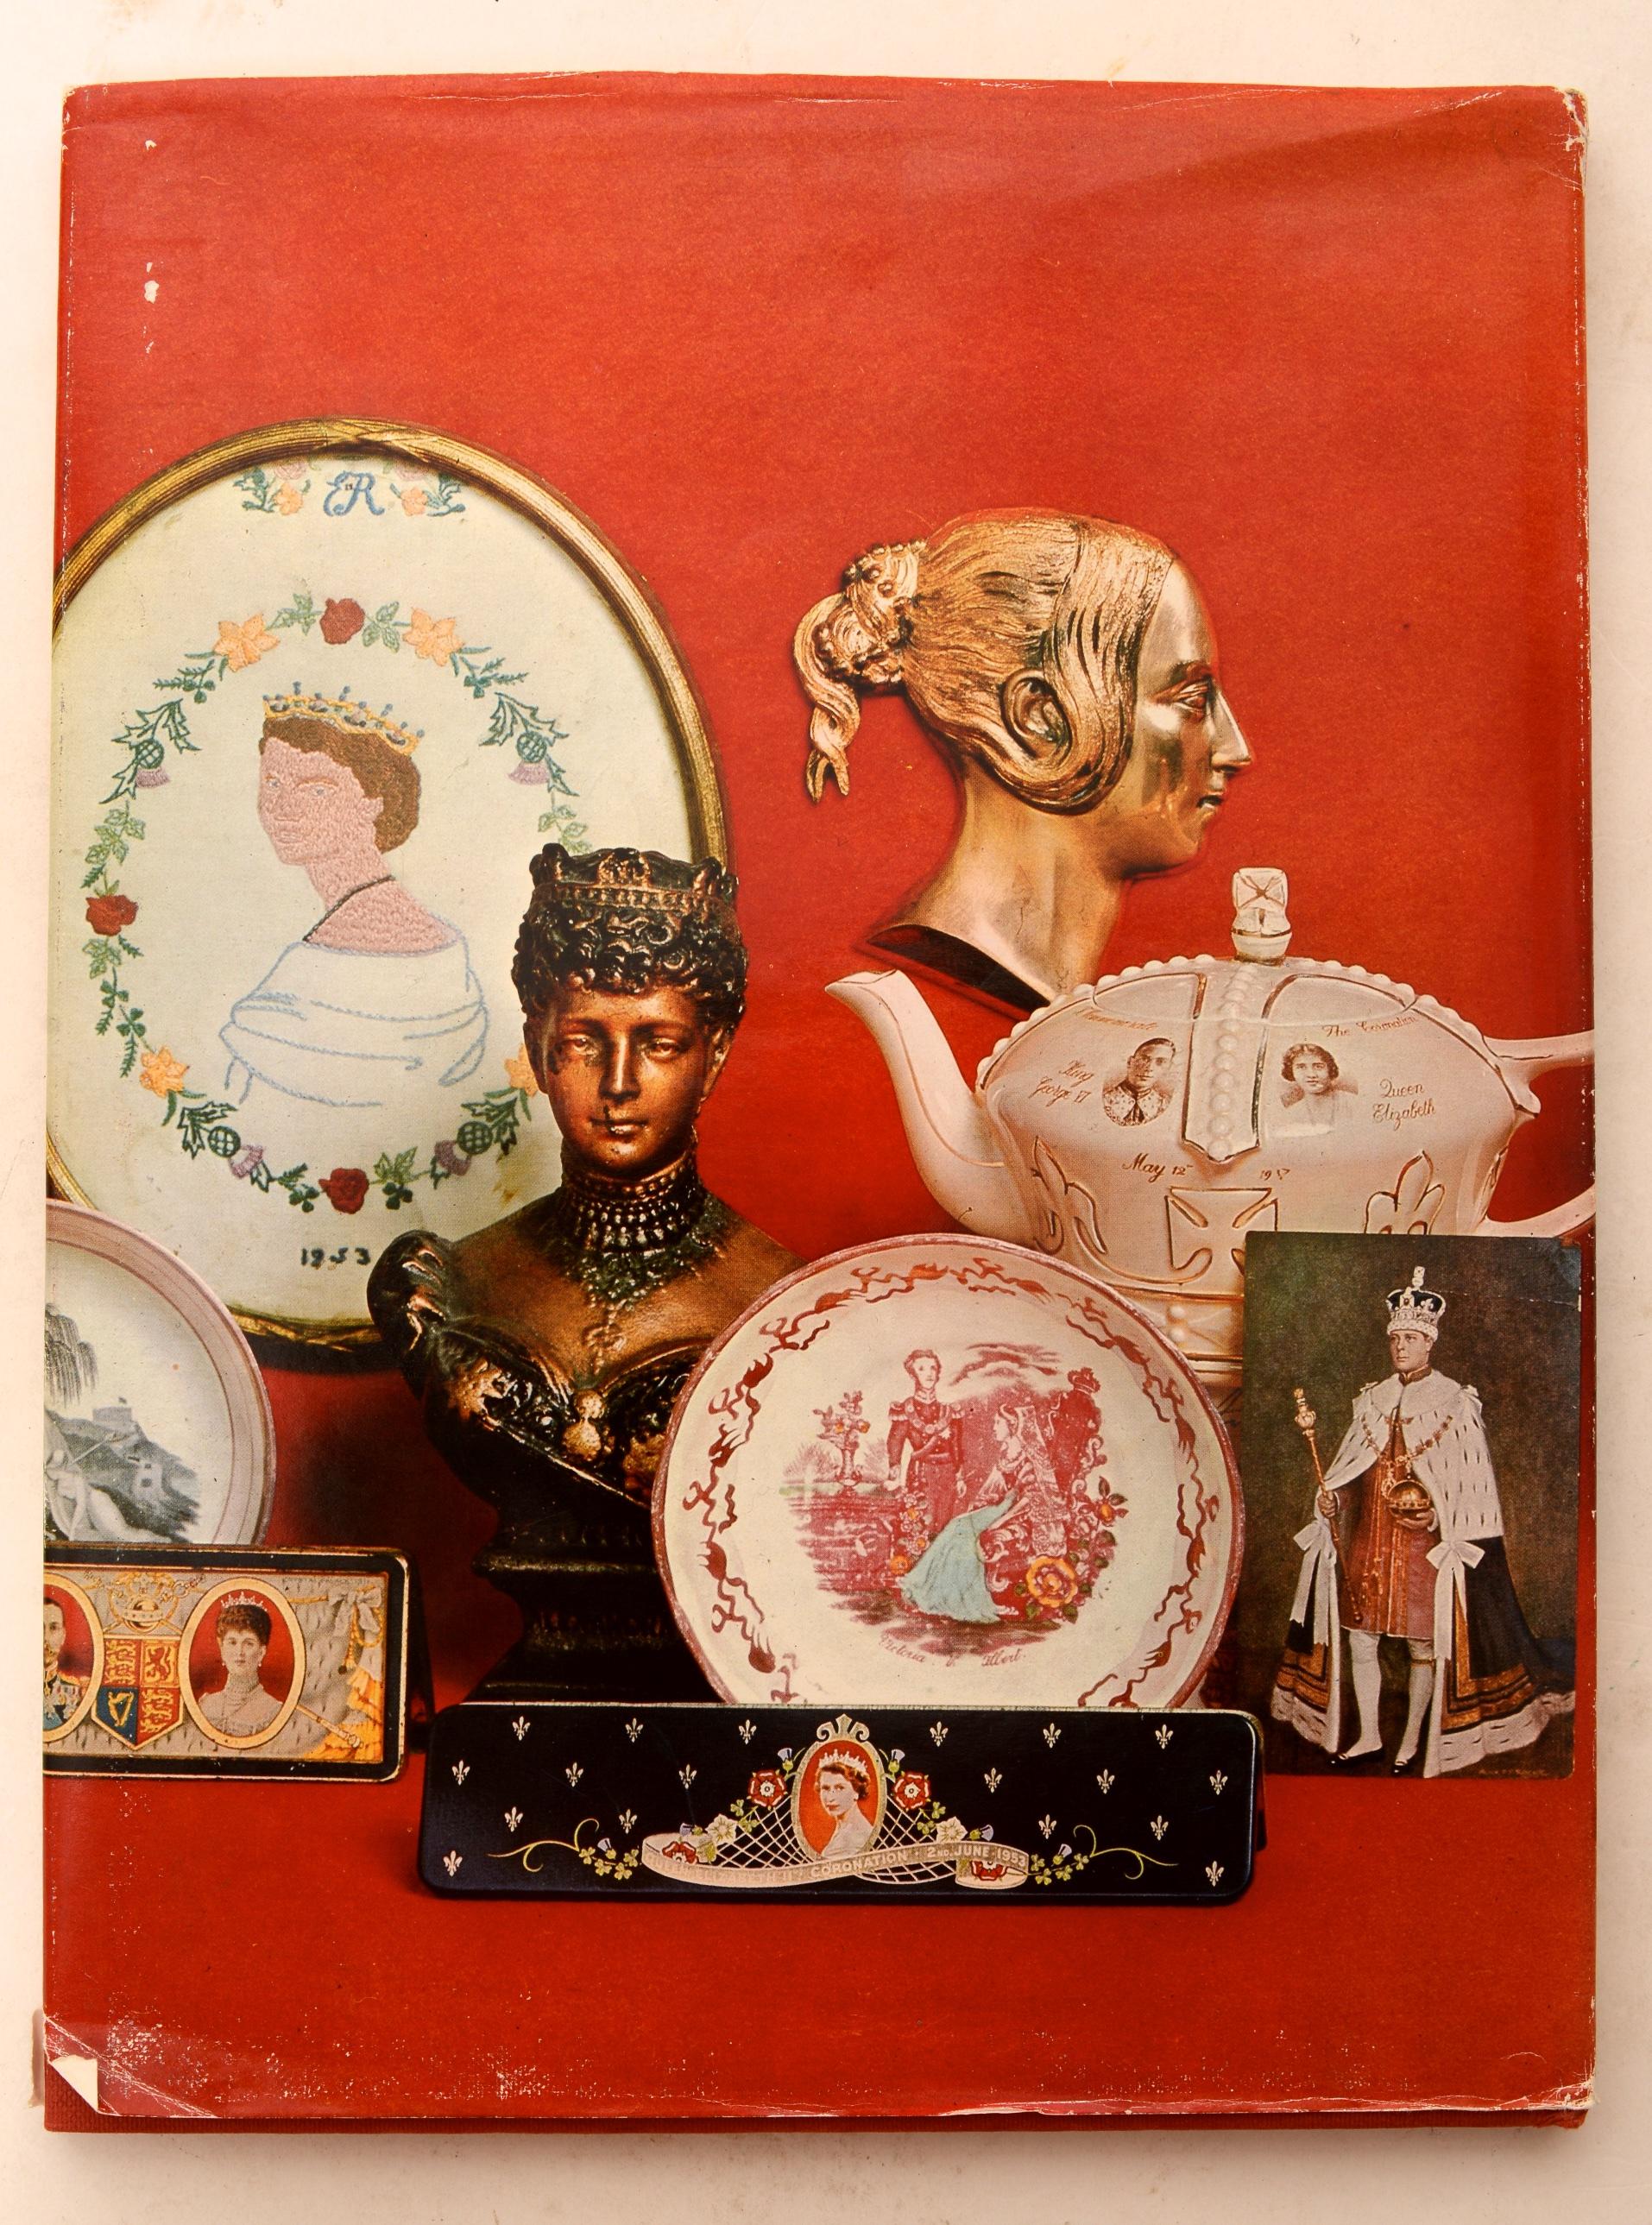 Royal Souvenirs by Geoffrey Warren. Orbis Publishing, 1977. 1st Edition, 64 page hardcover with a dust jacket. Explores the surprisingly wide range of royal commemoratives or souvenirs now available in specialist shops and antique markets. This